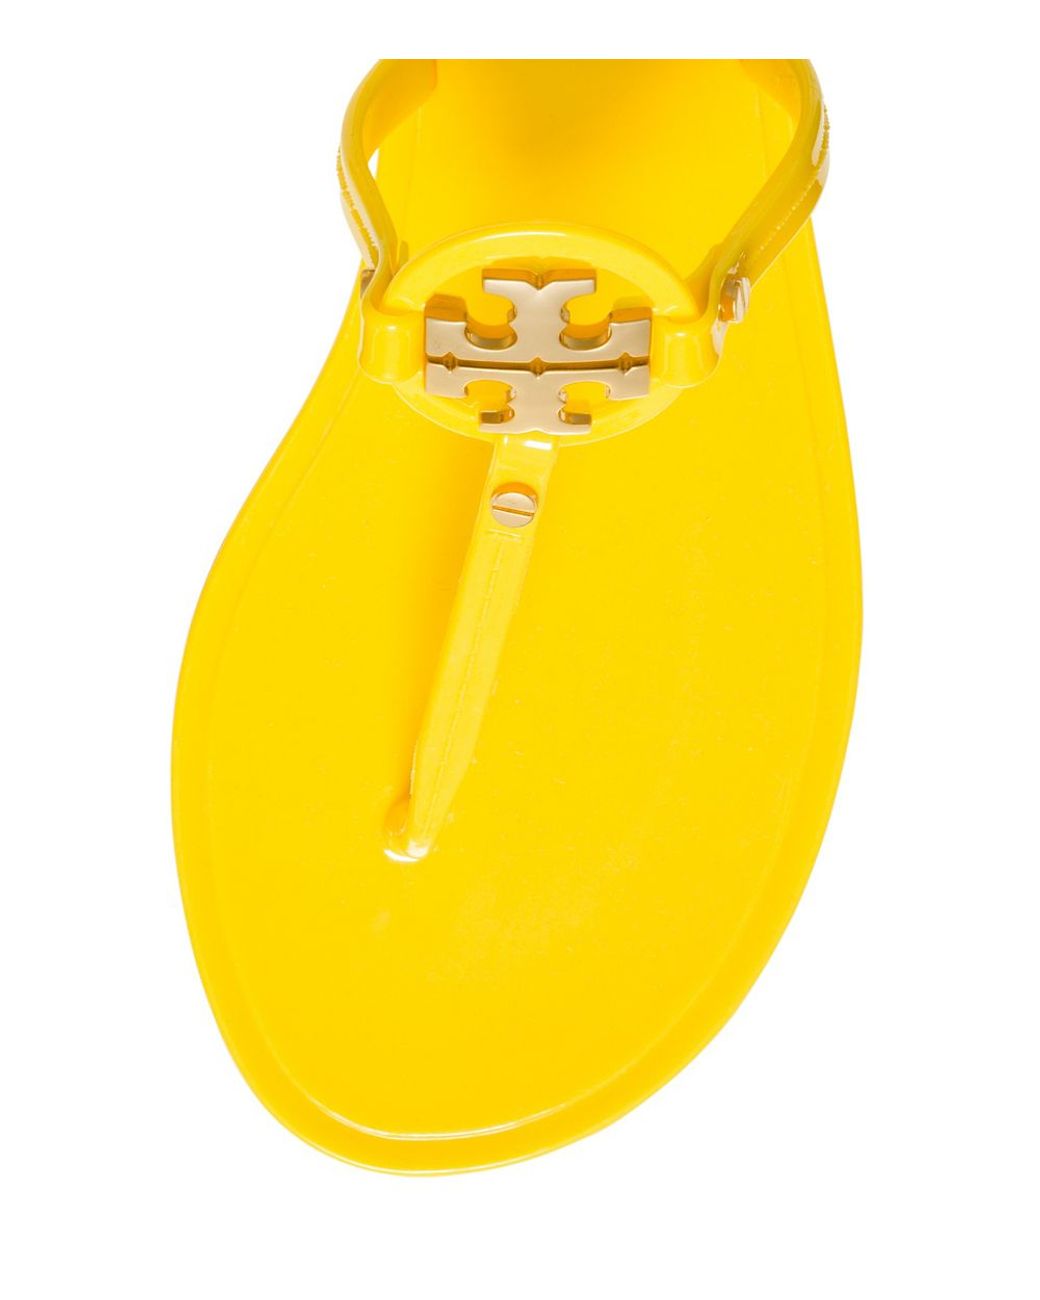  Tory Burch Women's Yellow Banana Leather Miller Thong Sandals  Shoes (Numeric_6)